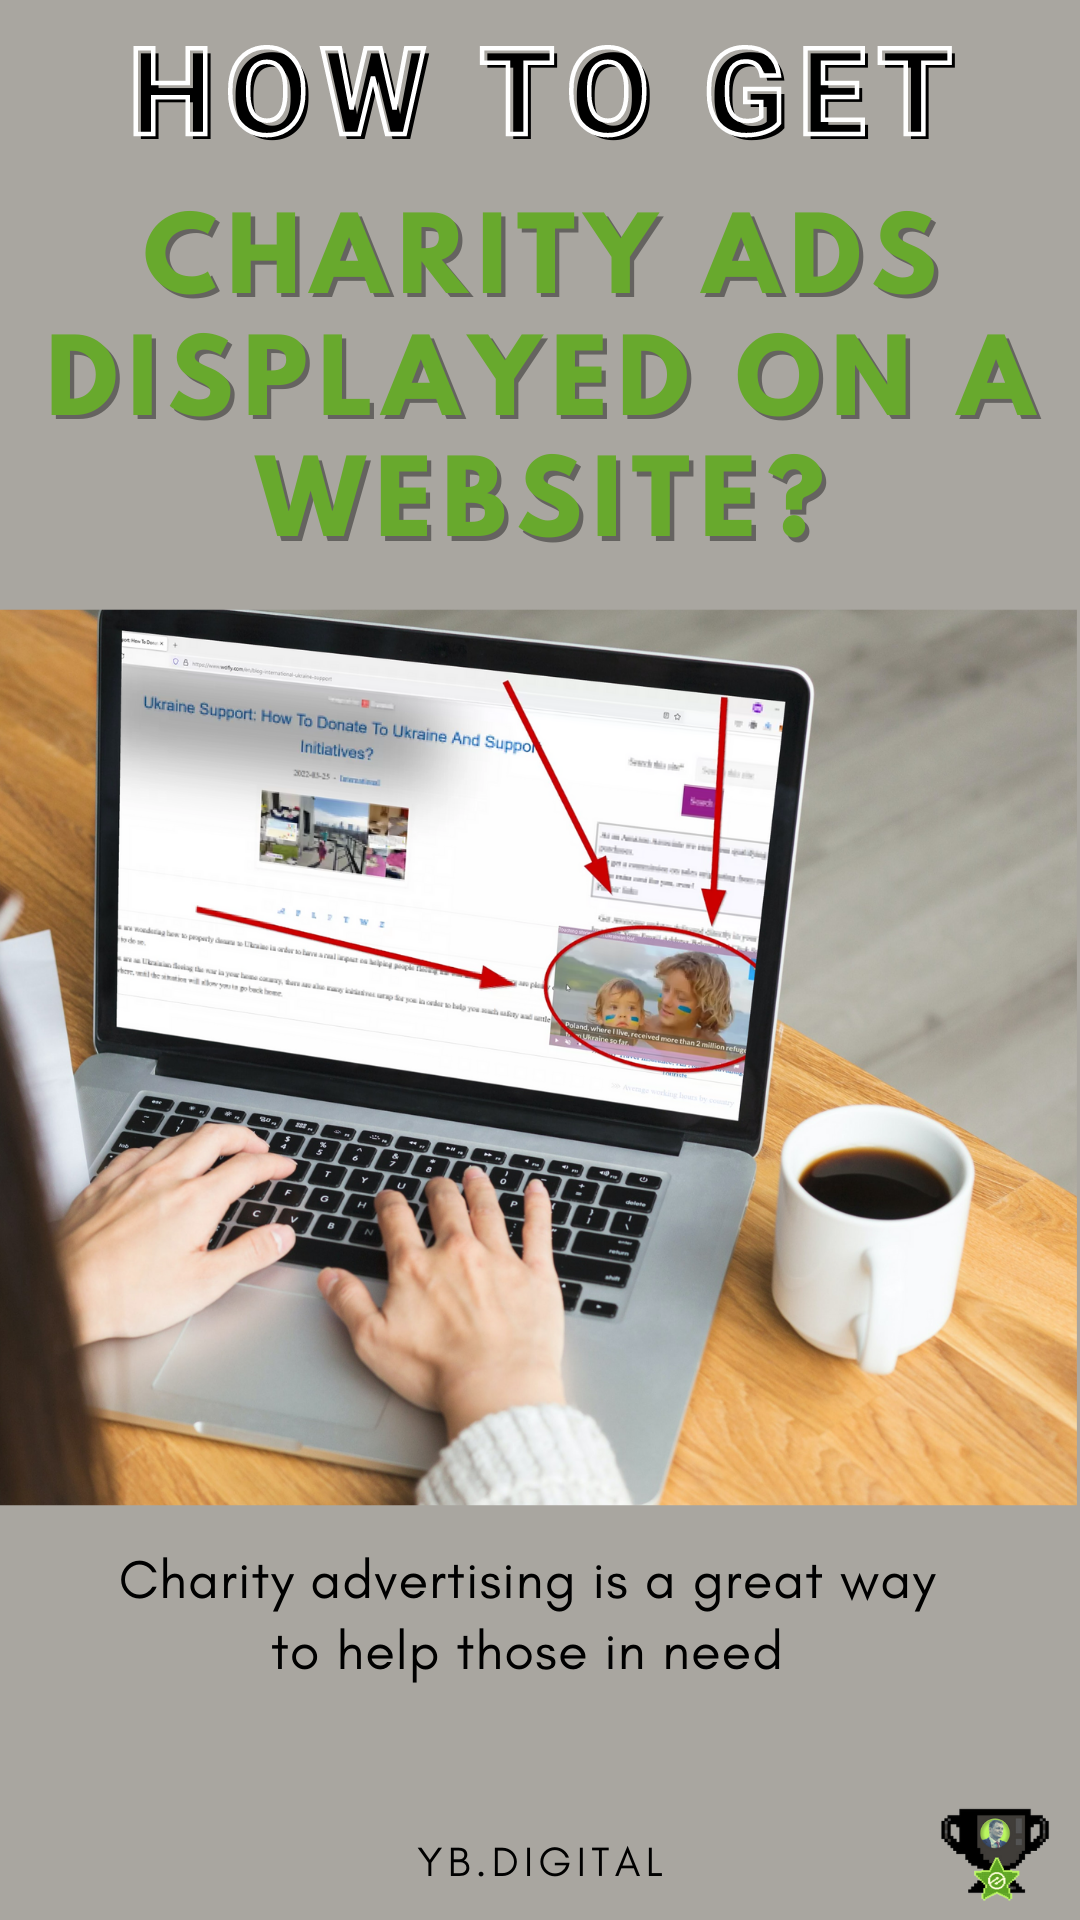 Many people make enough money with display advertising and want to contribute to charities. However, most of them are so busy with their own affairs that they forget about donations in time. If you are one of those people, consider displaying charity display ads on your websites.